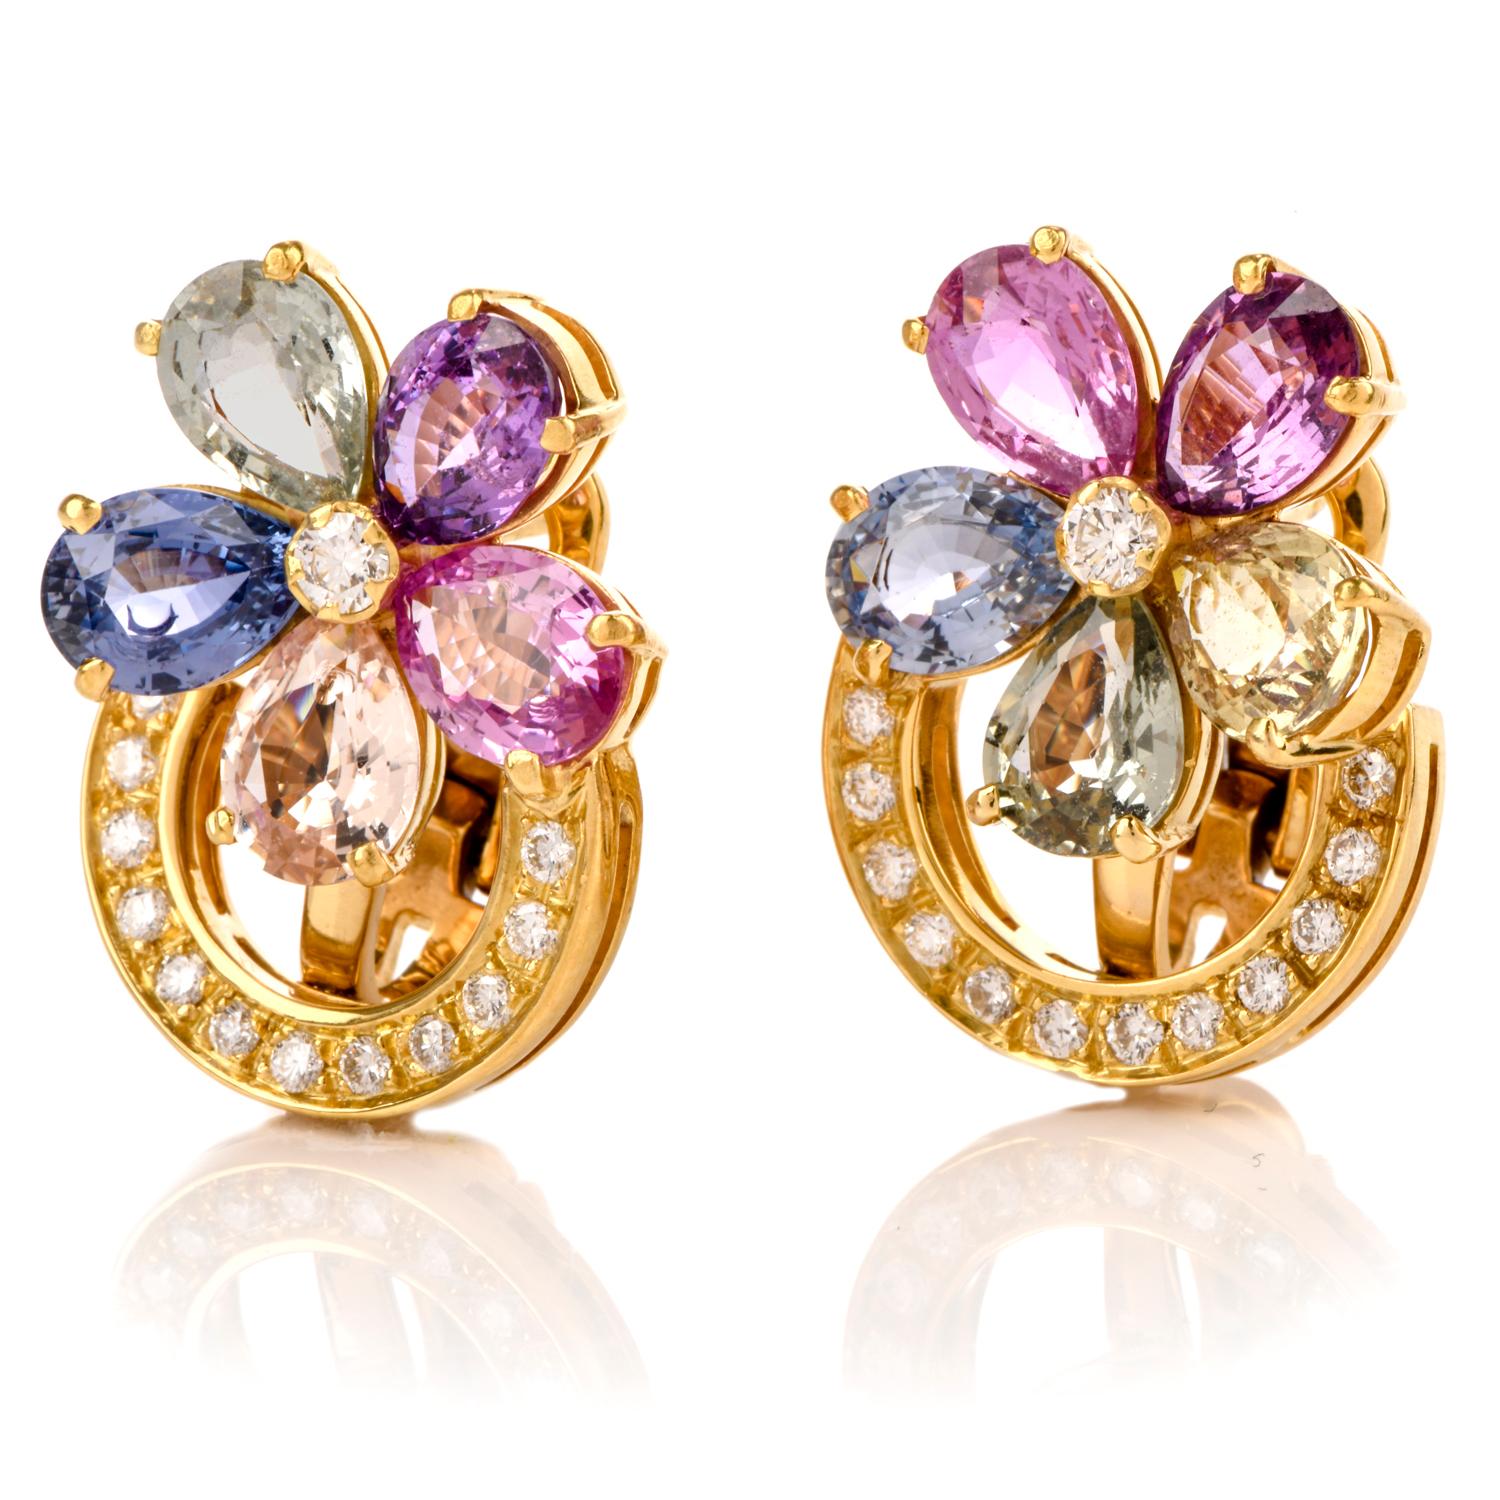 These chic designer Bvlgari multi-color Natural sapphire and diamond earrings are crafted in solid 18-karat yellow gold, weighing 18 grams and measuring 25mm high x 18mm wide. Composed of 10 natural, no heat , pear-shaped genuine sapphires ( No